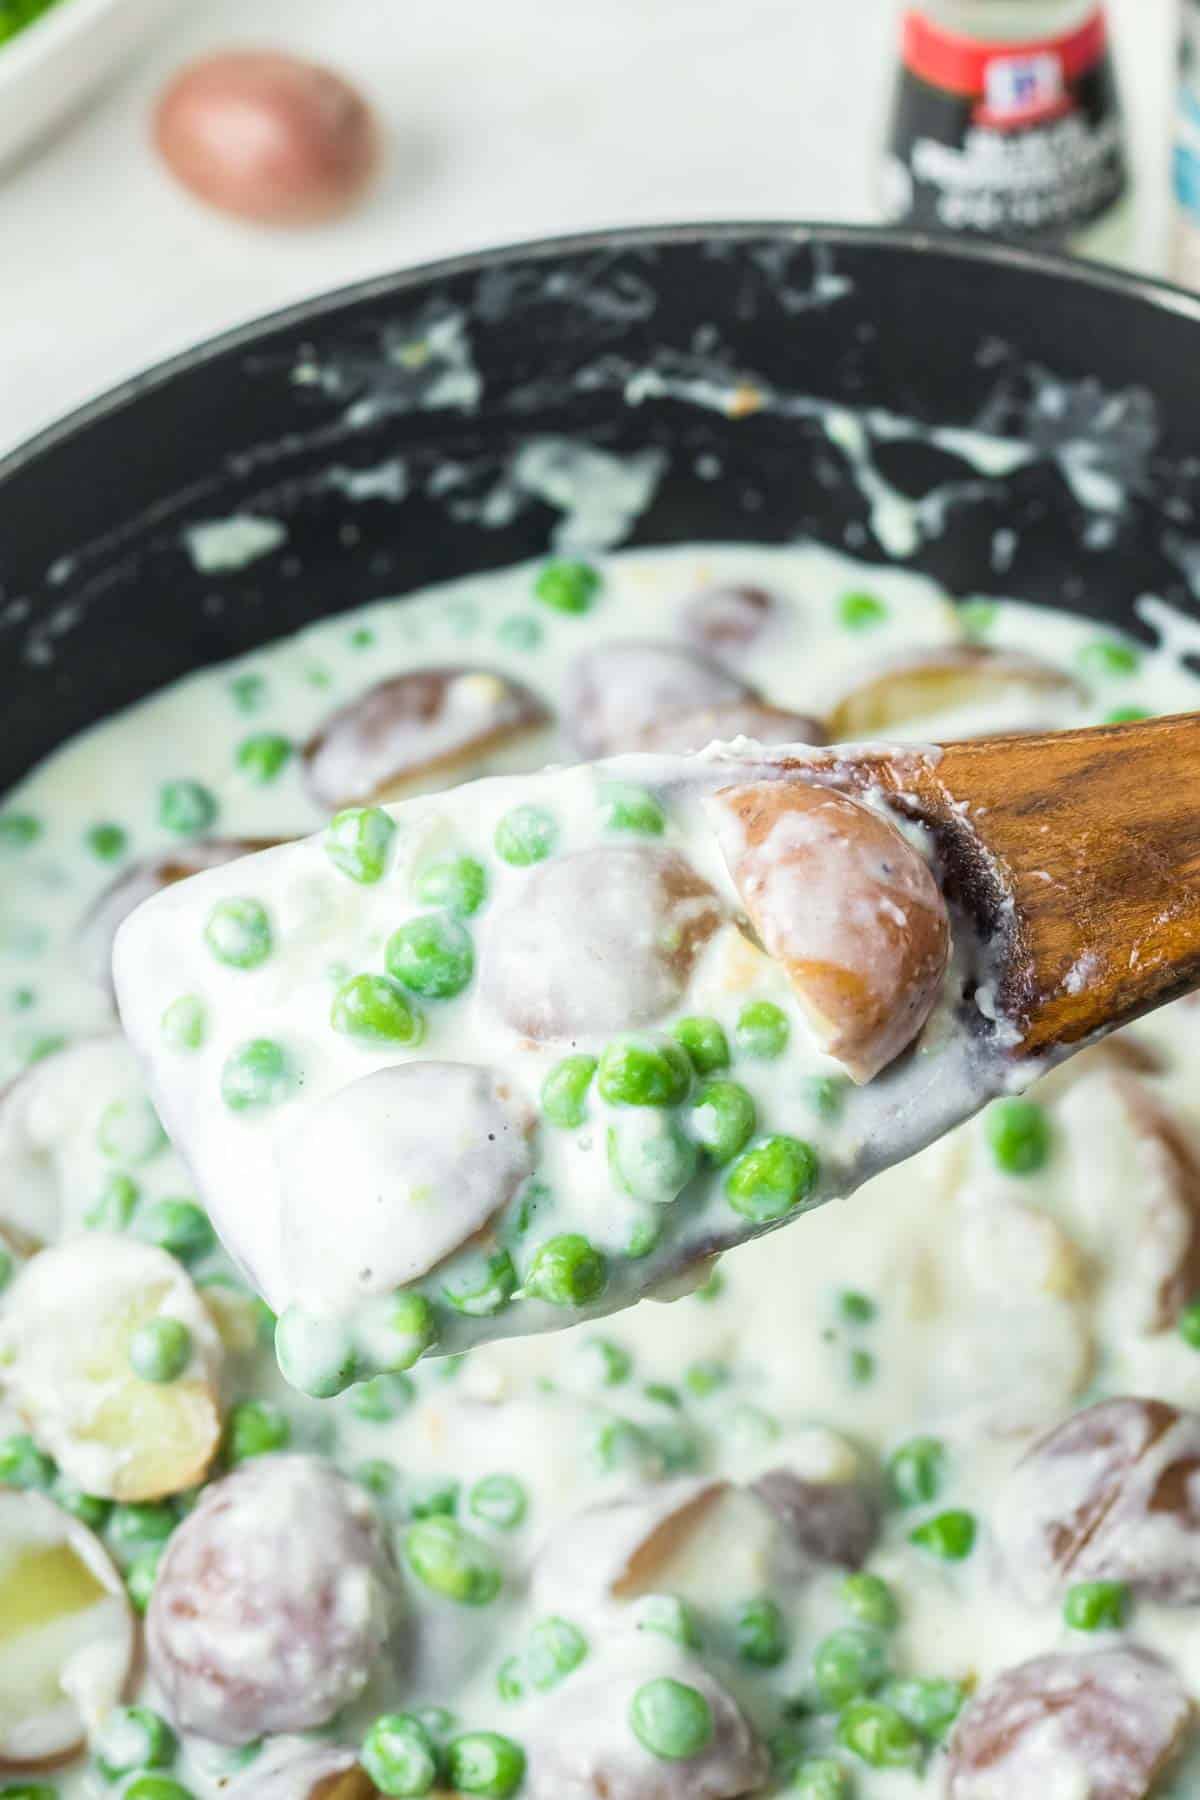 Creamed peas and potatoes on a wooden spoon.